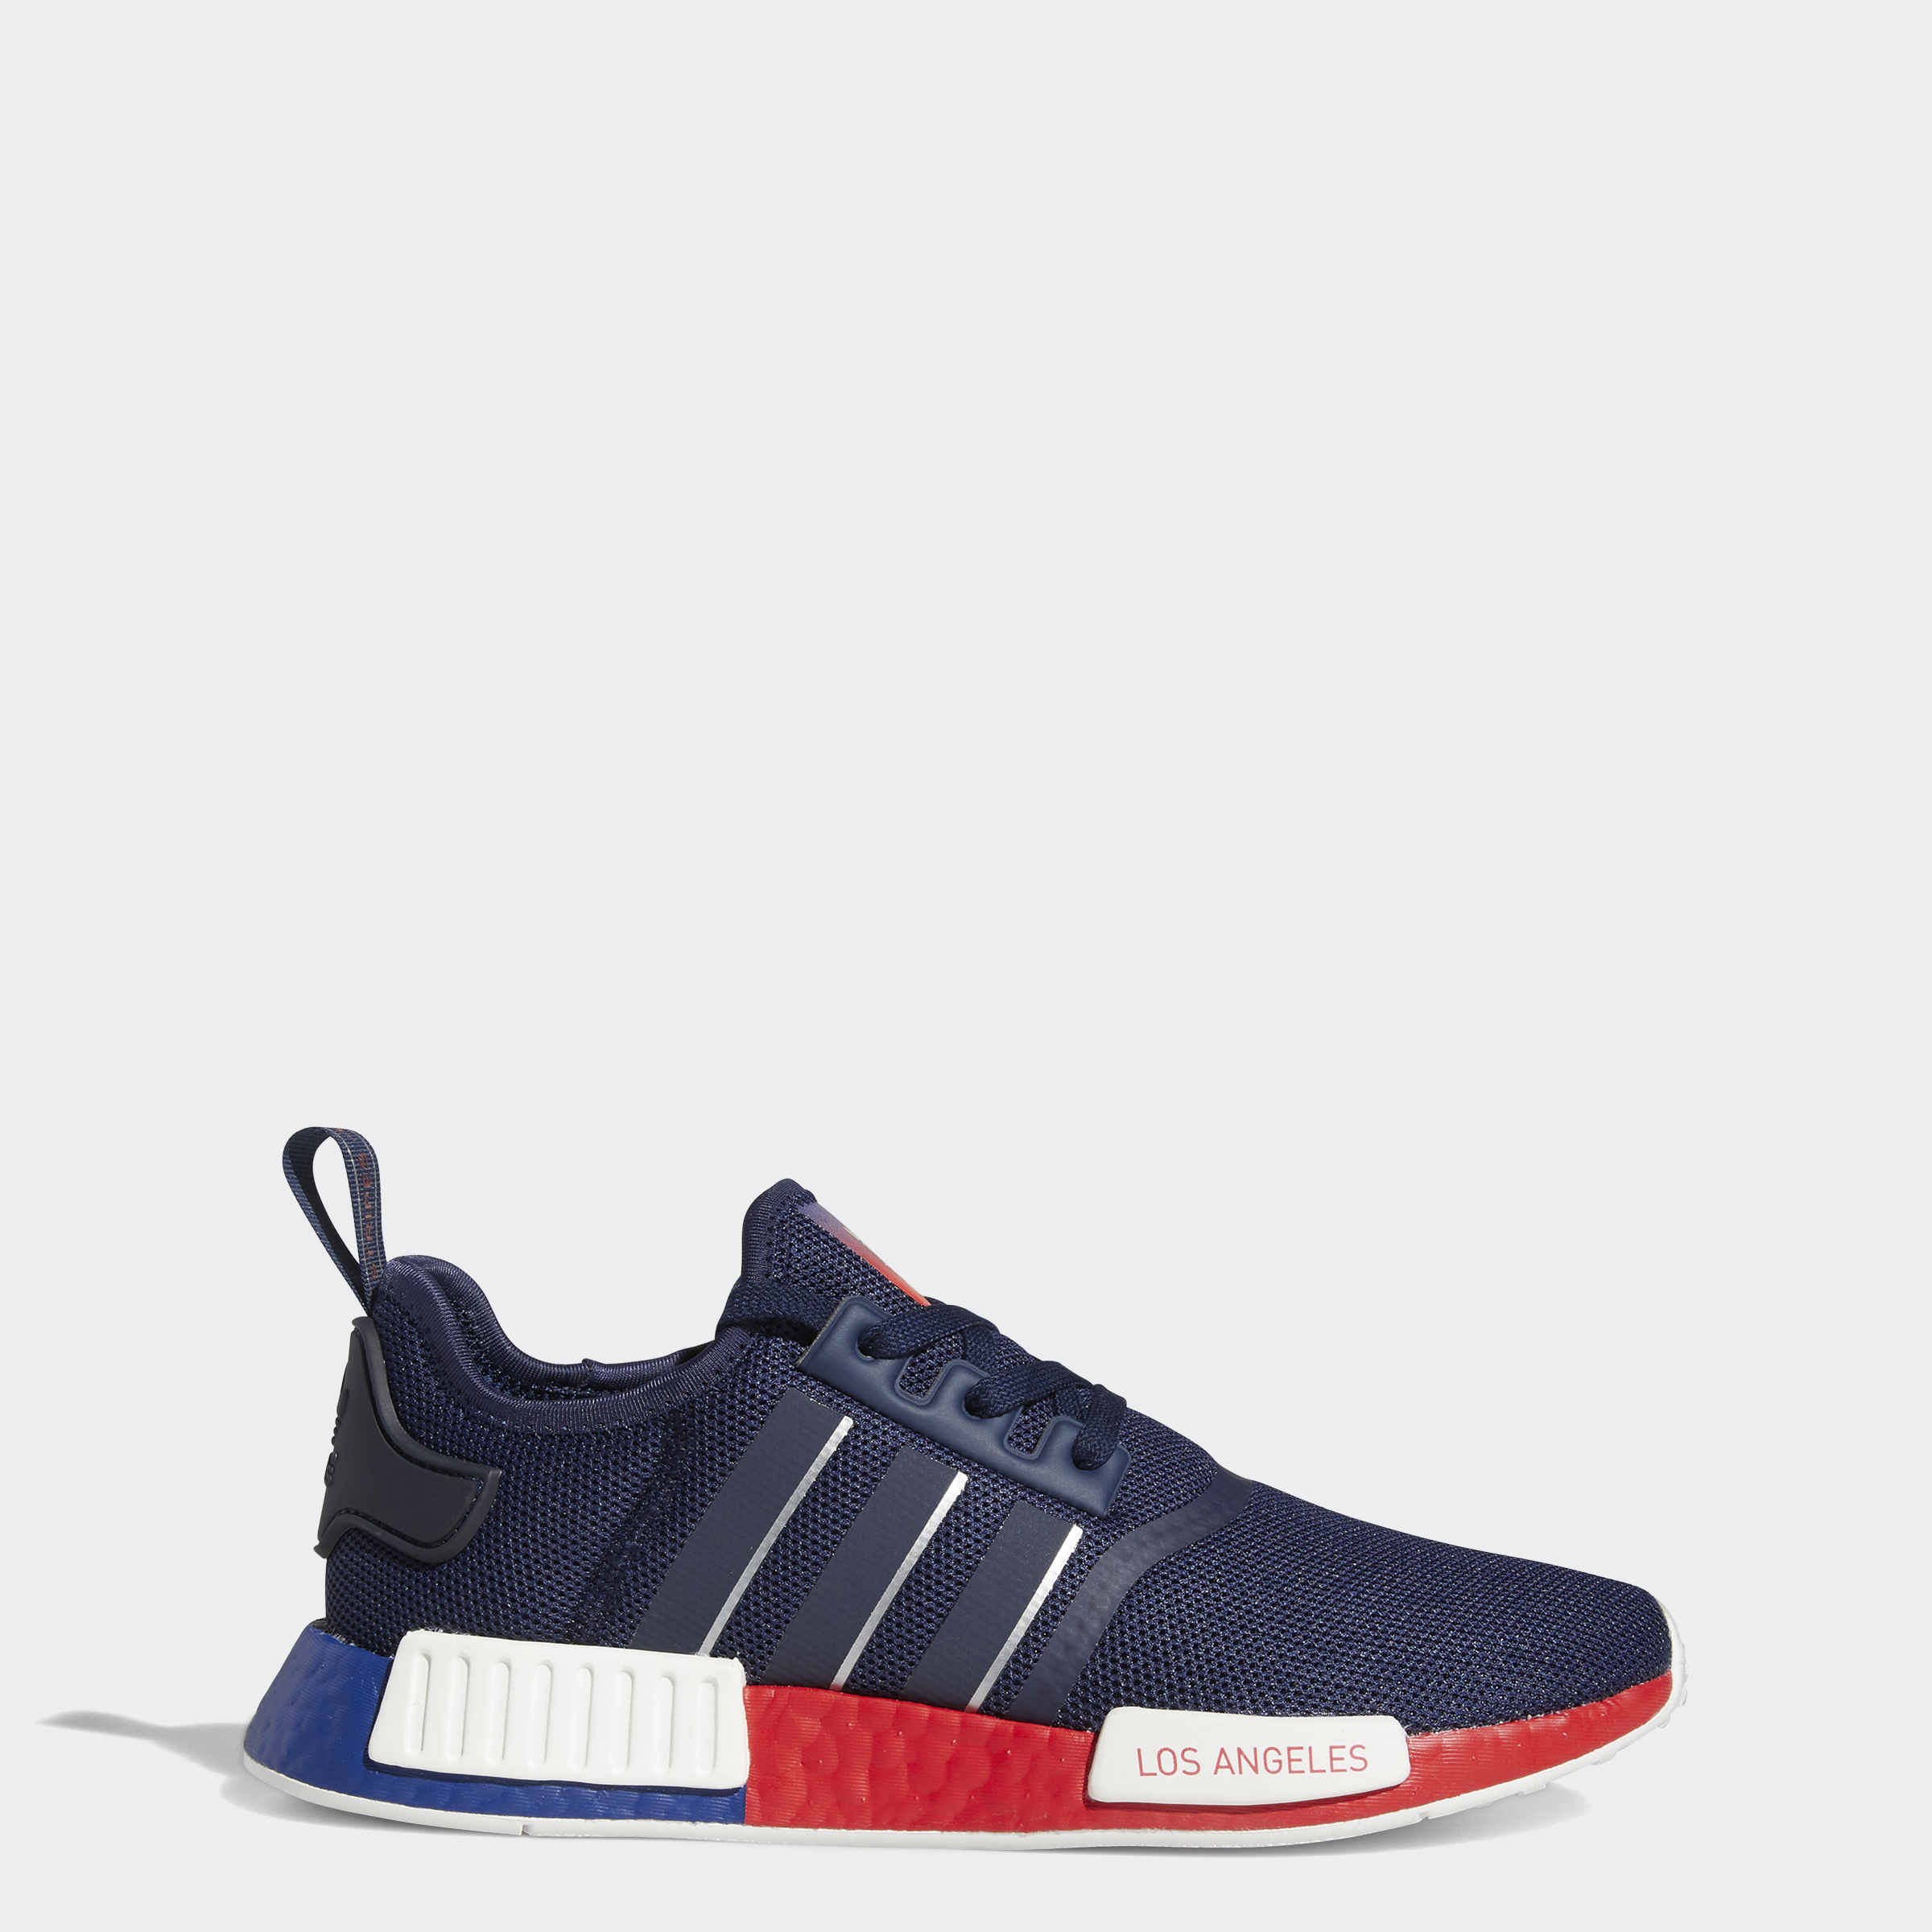 nmd_r1 los angeles shoes